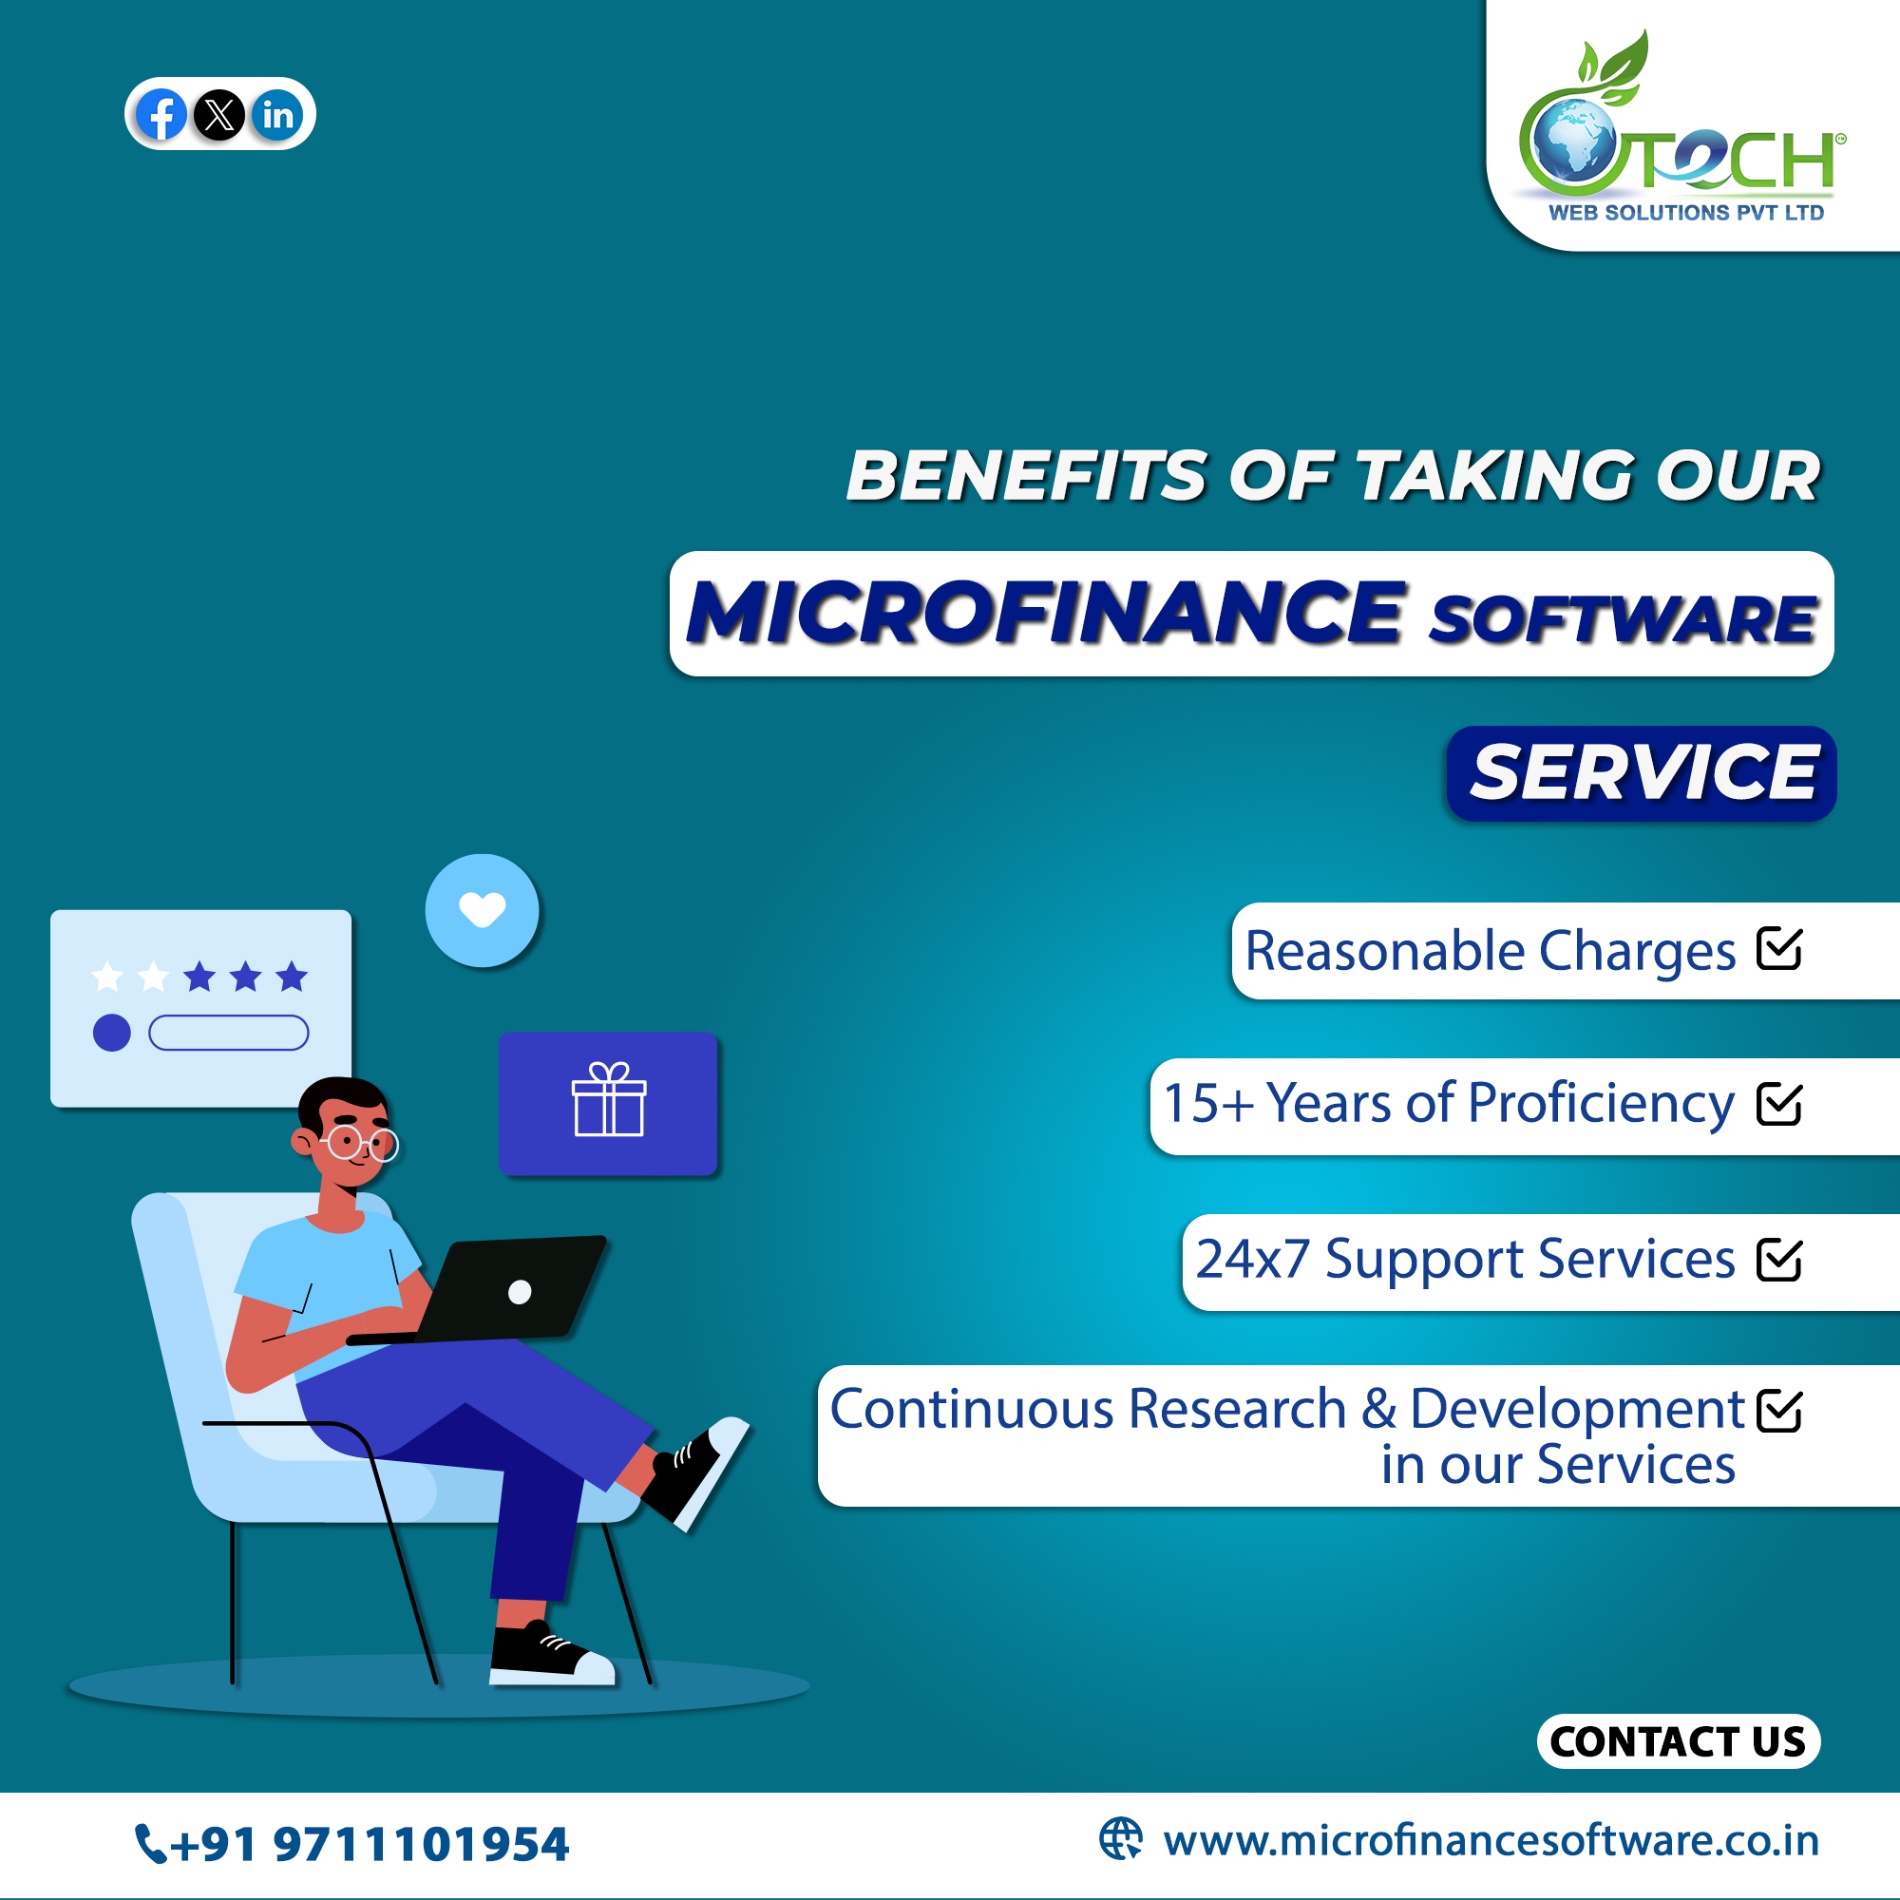 Microfinance software solutions | Microfinance software solutions in India